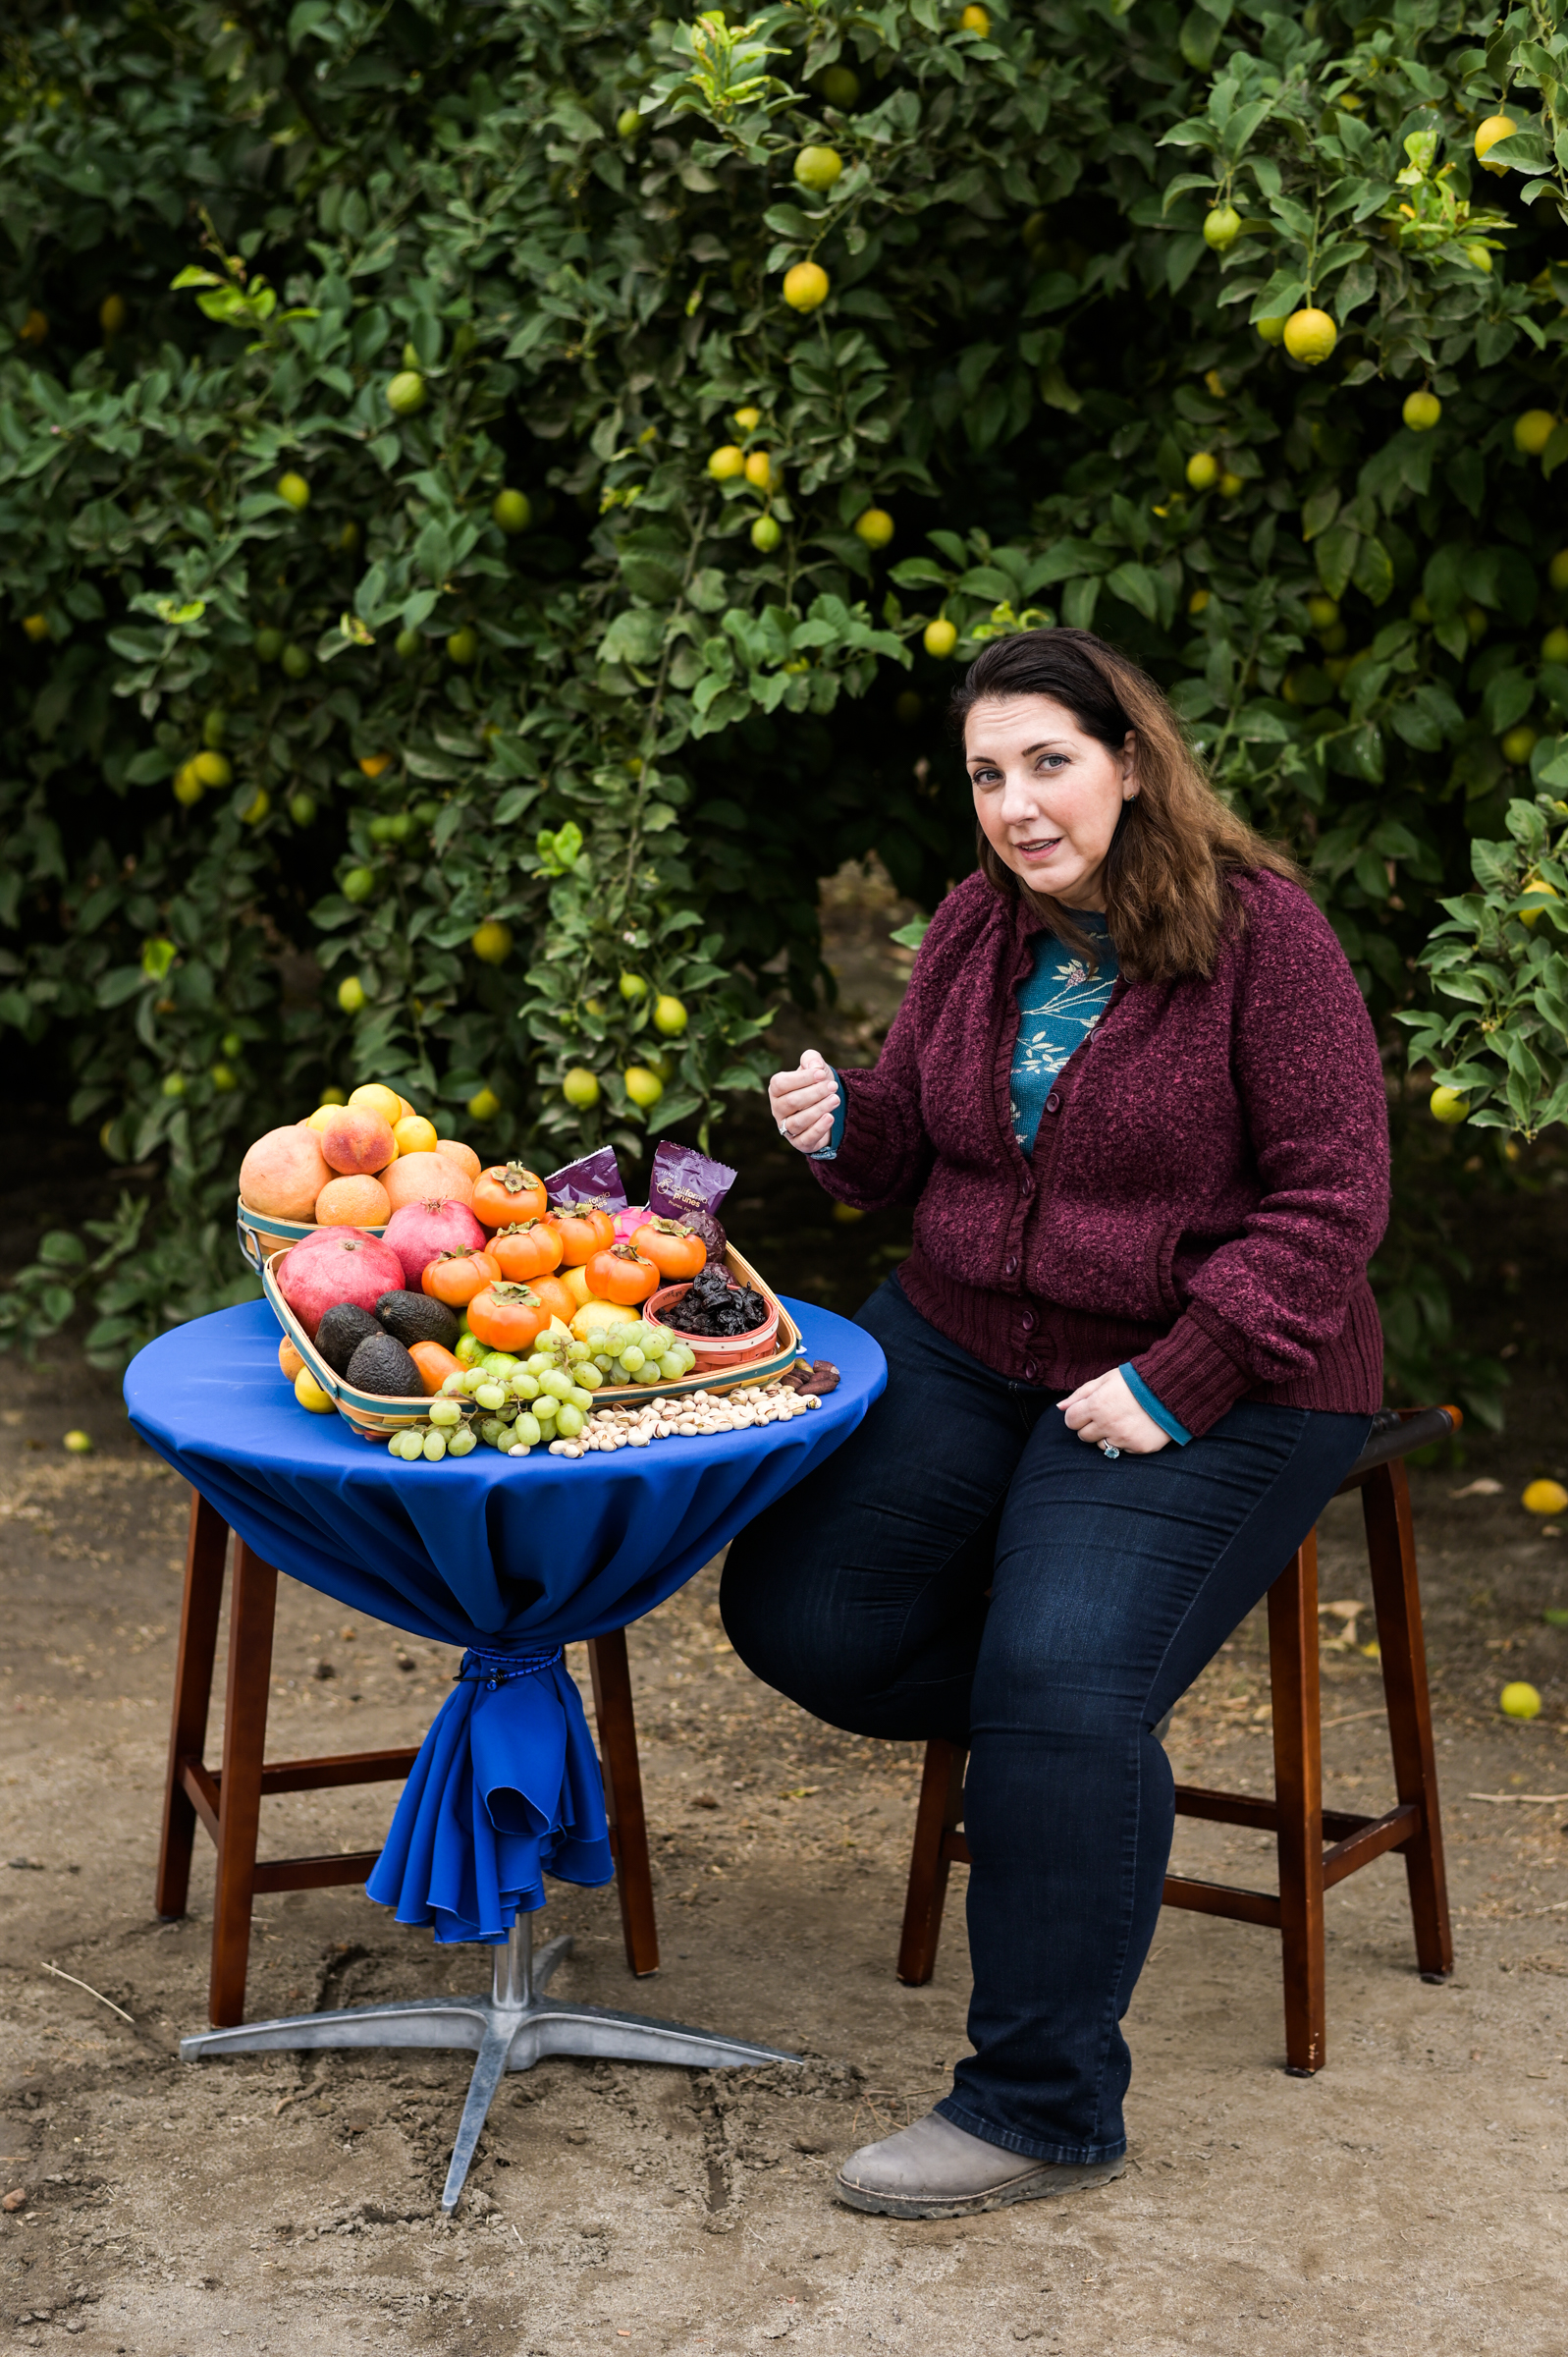 KC talks about the diversity of California's specialty crops